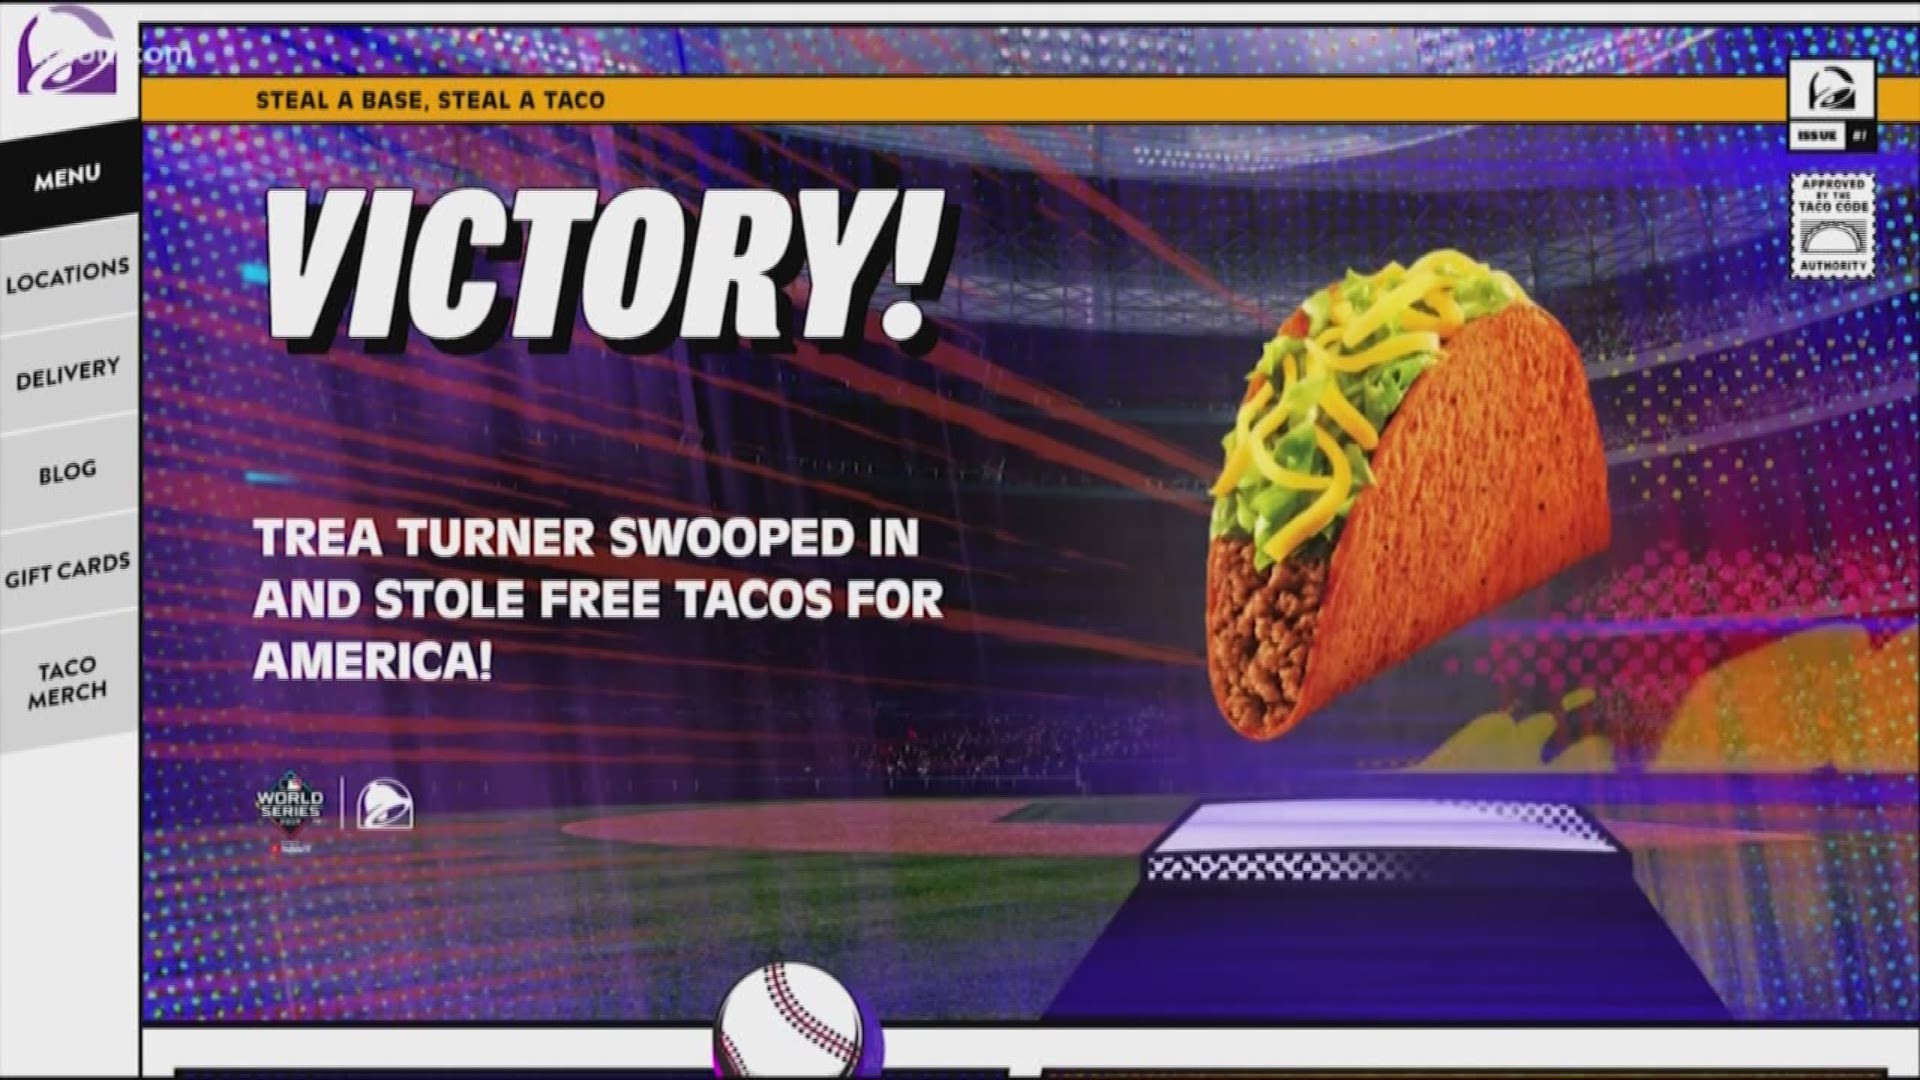 We were bummed when Trea Turner stole a base during the first game of the World Series, but it also got everyone a free taco from Taco Bell. We can't be that mad.